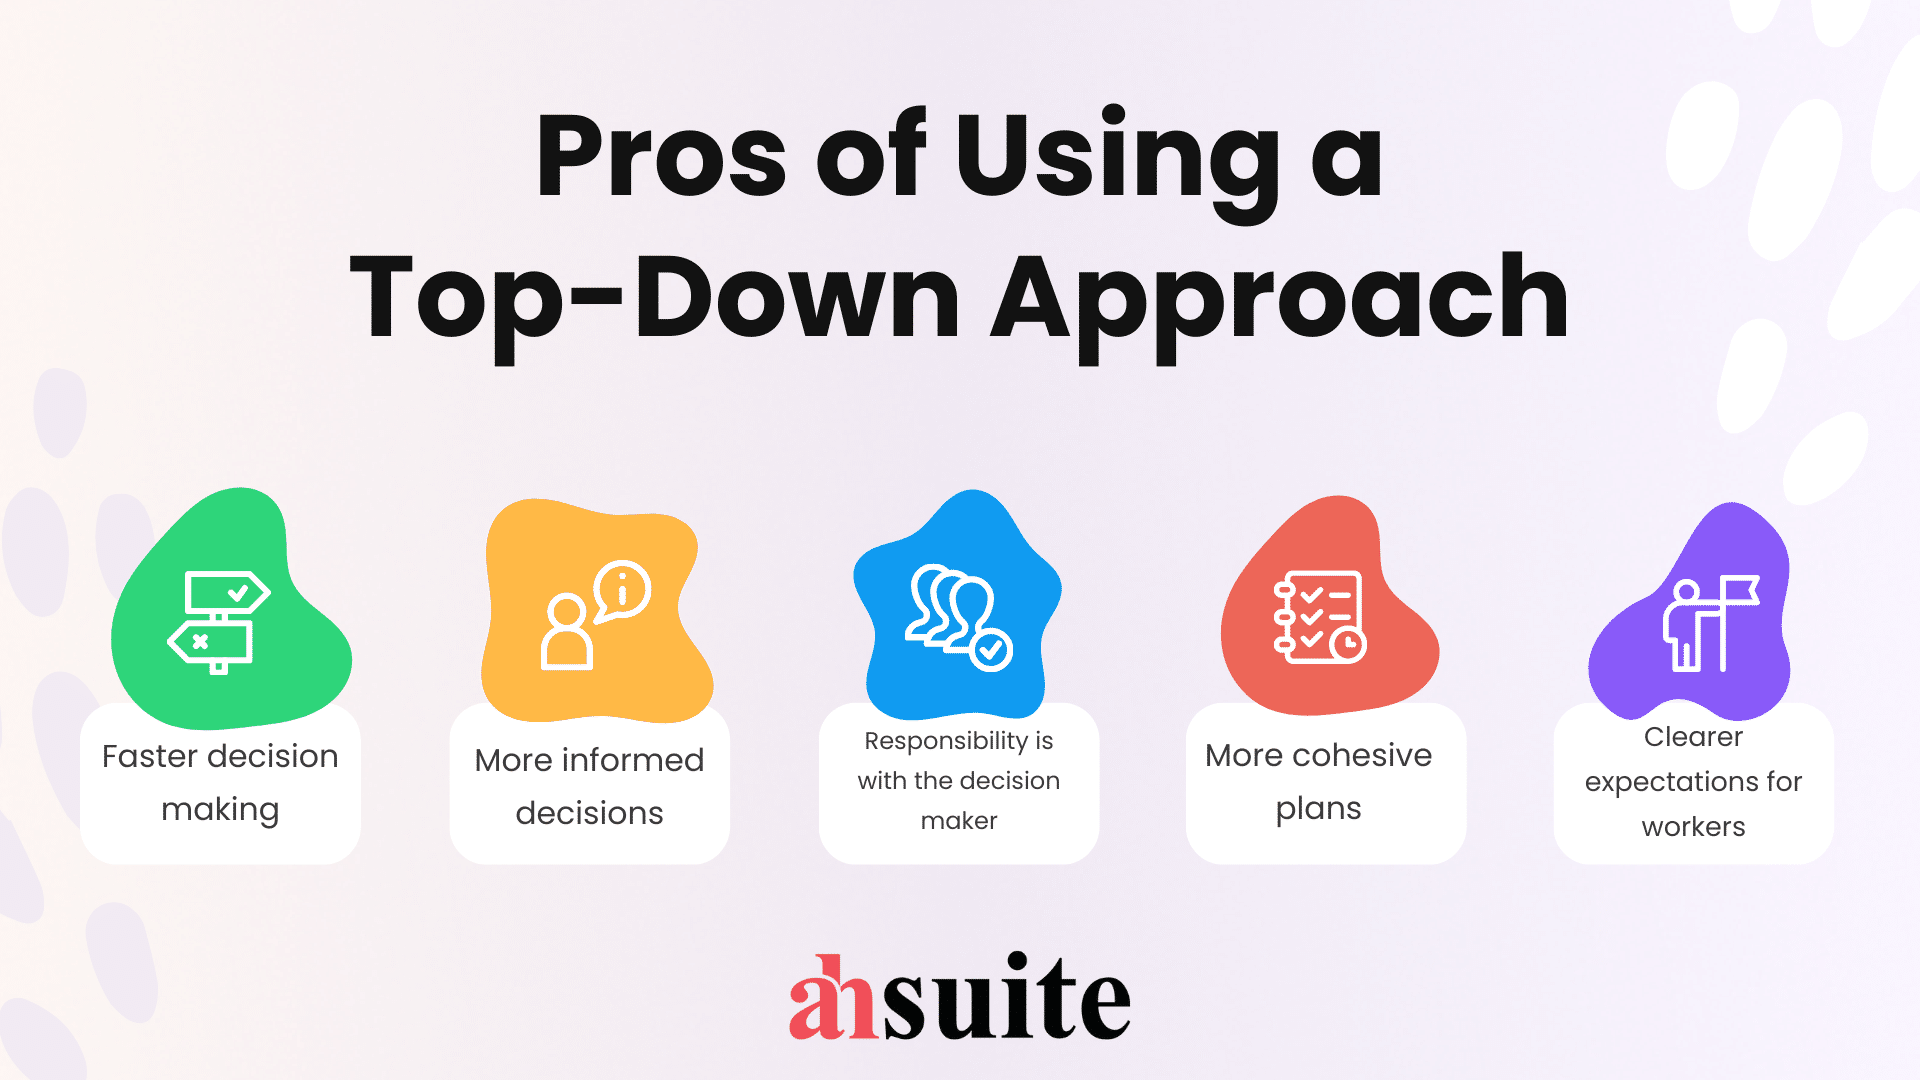 Pros of Using a Top-Down Approach